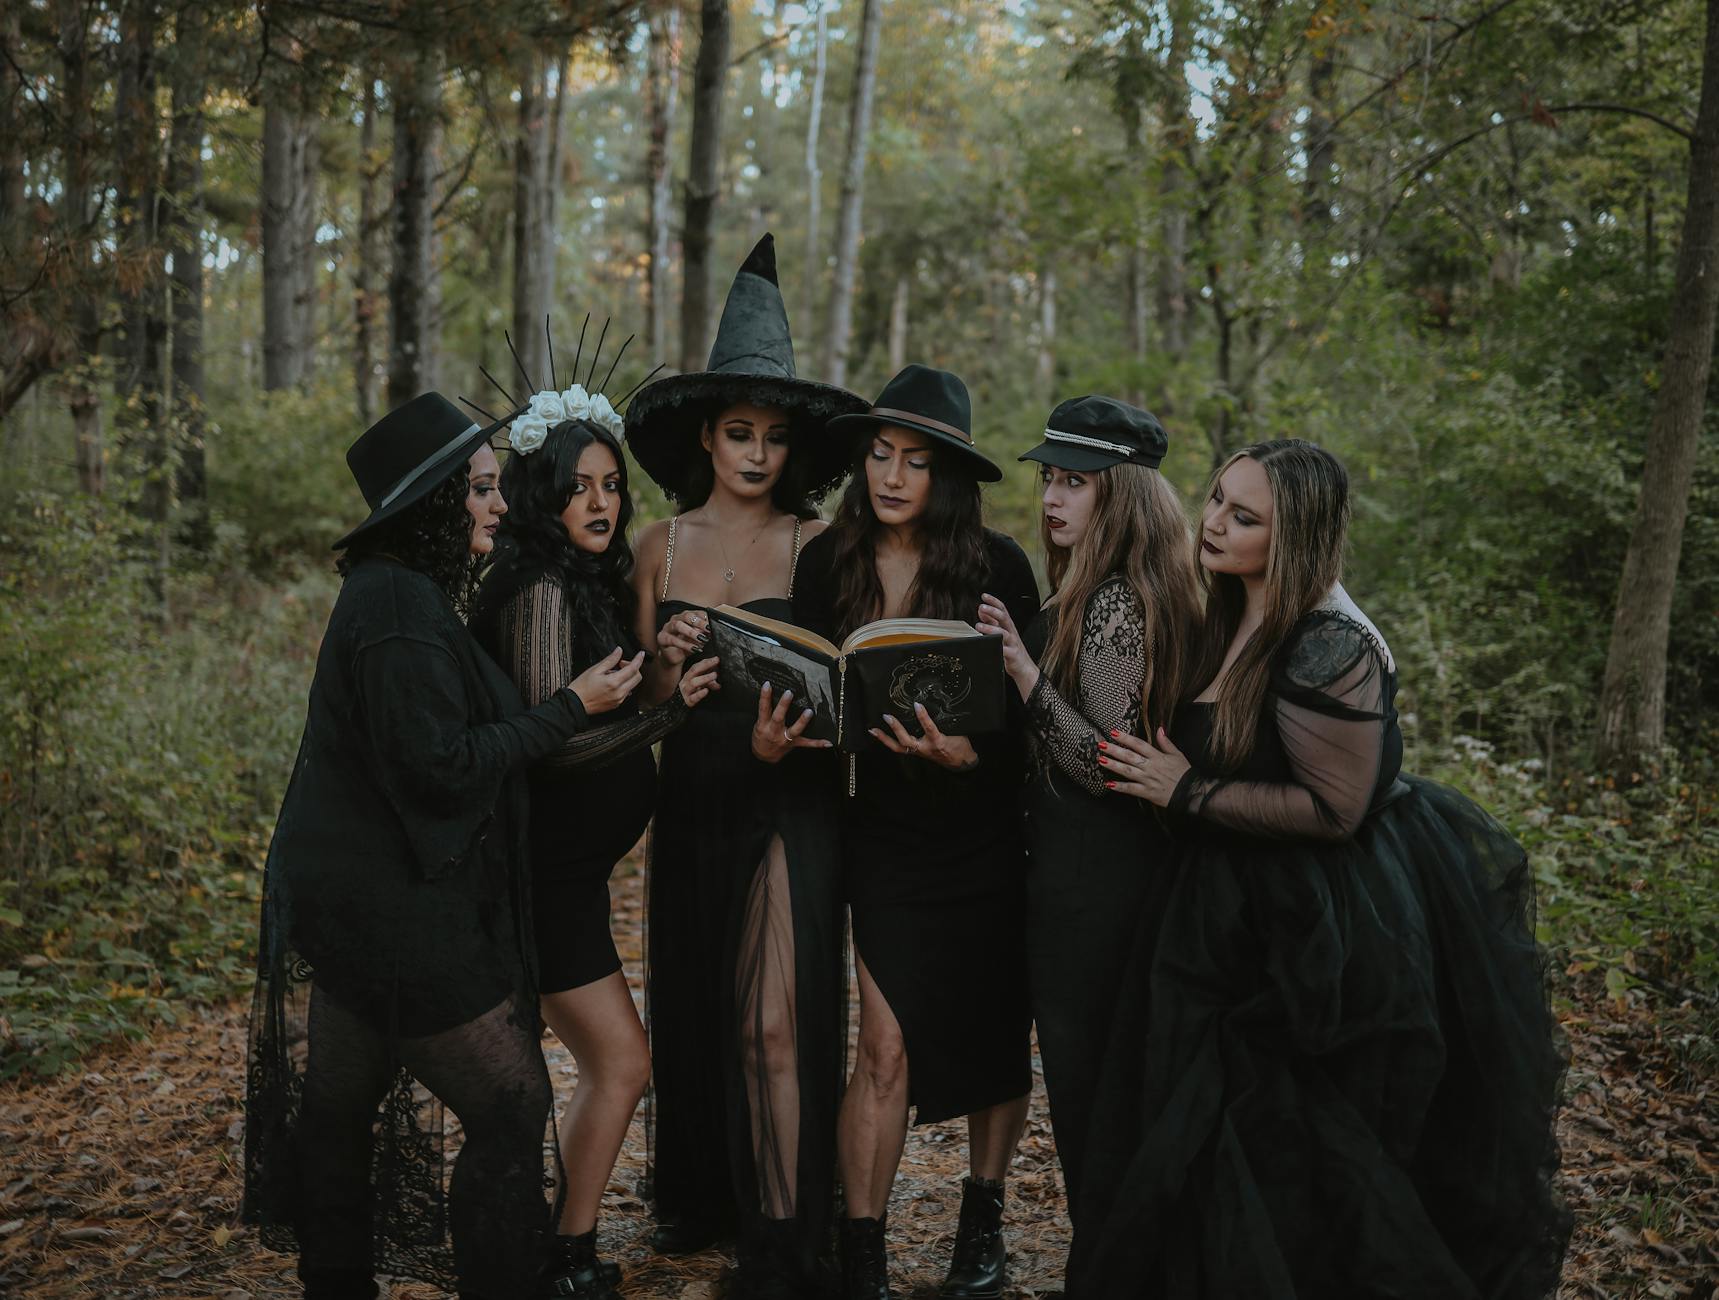 group of women dressed as witch coven reading spell book in forest